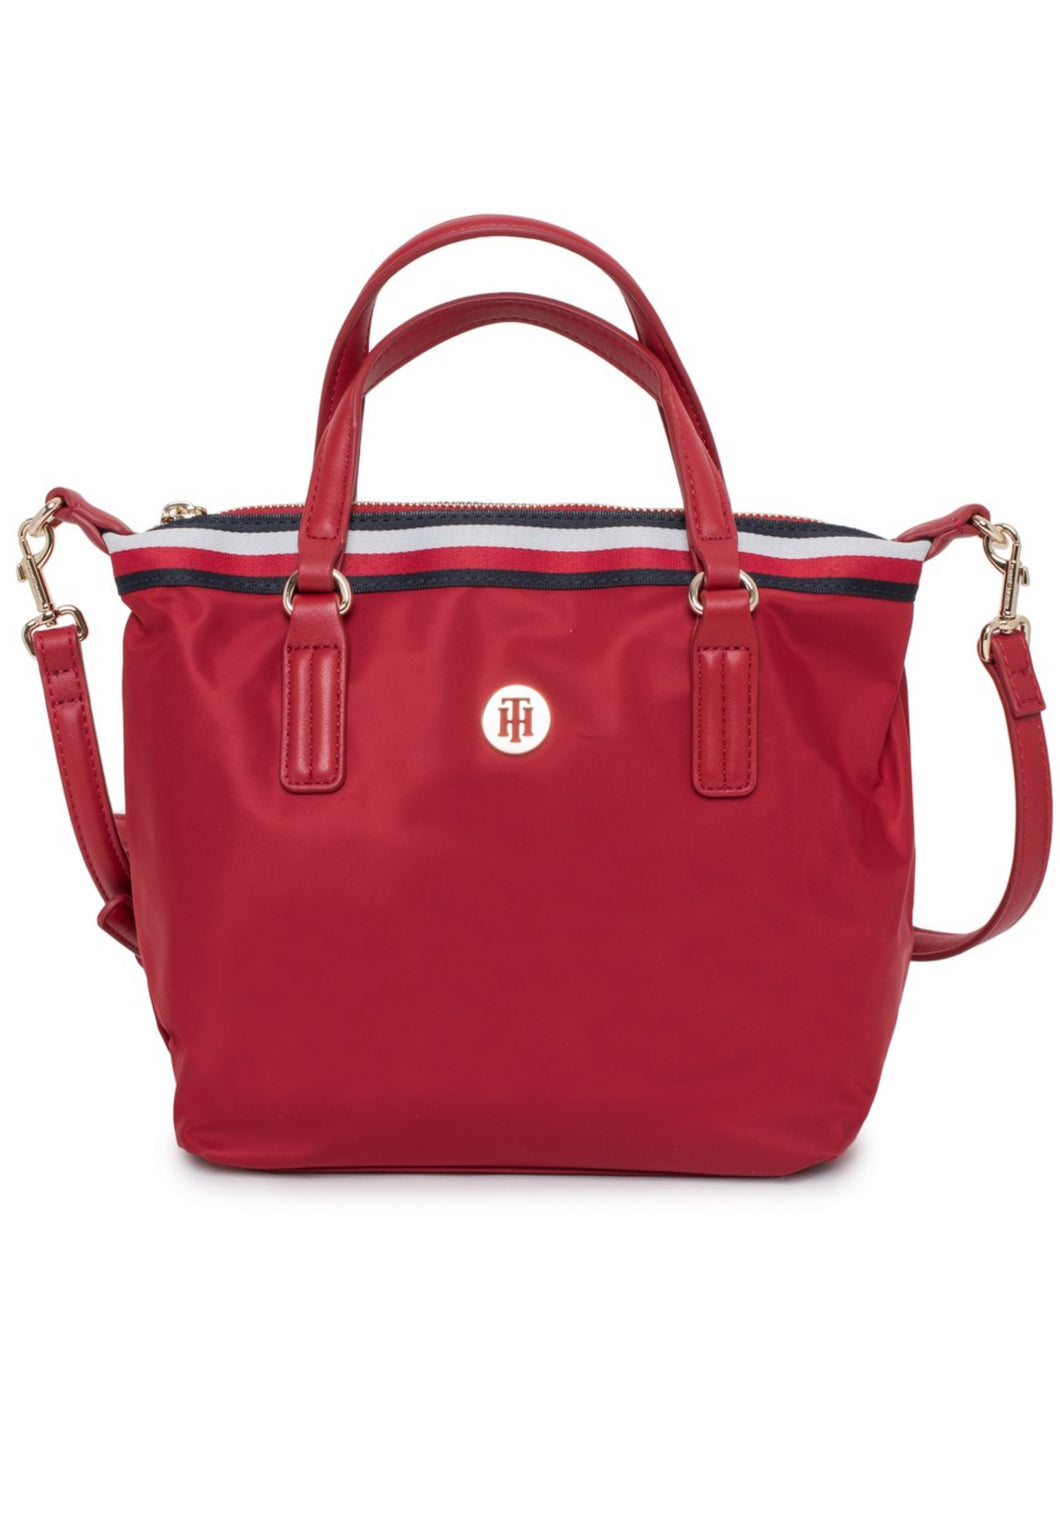 POPPY SMALL TOTE CORP - Handtasche